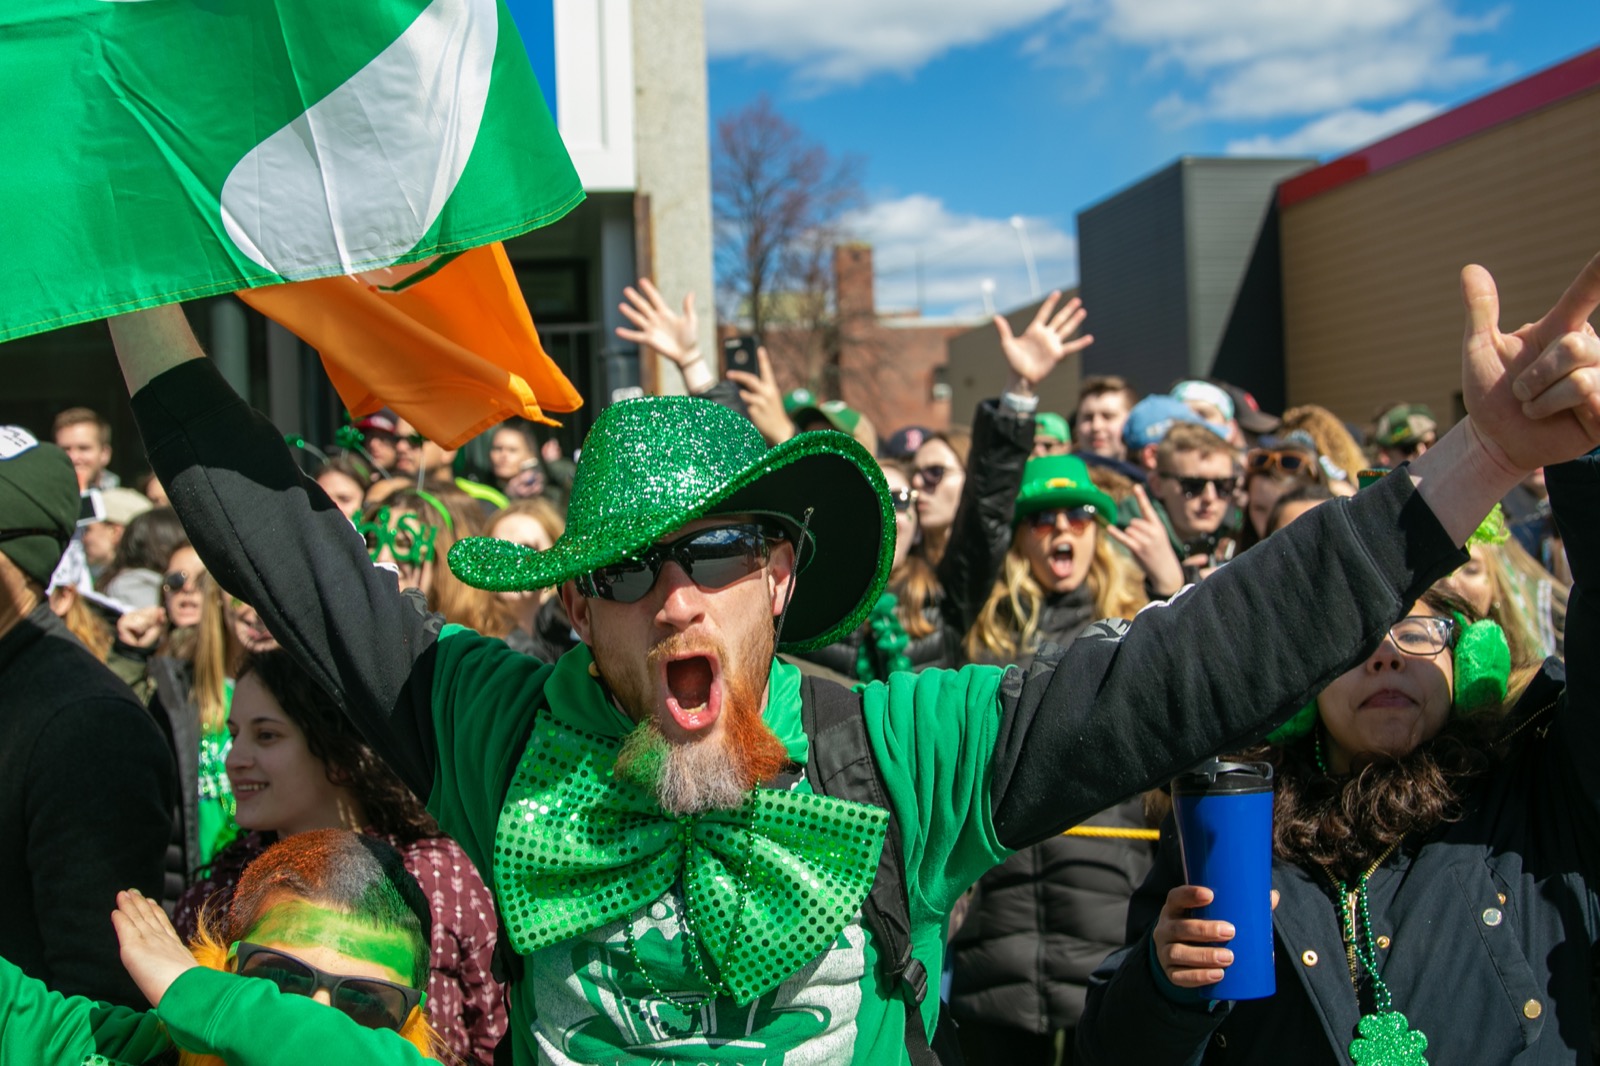 What Irish Mythological Creature Are You? St. Patrick's Day parade